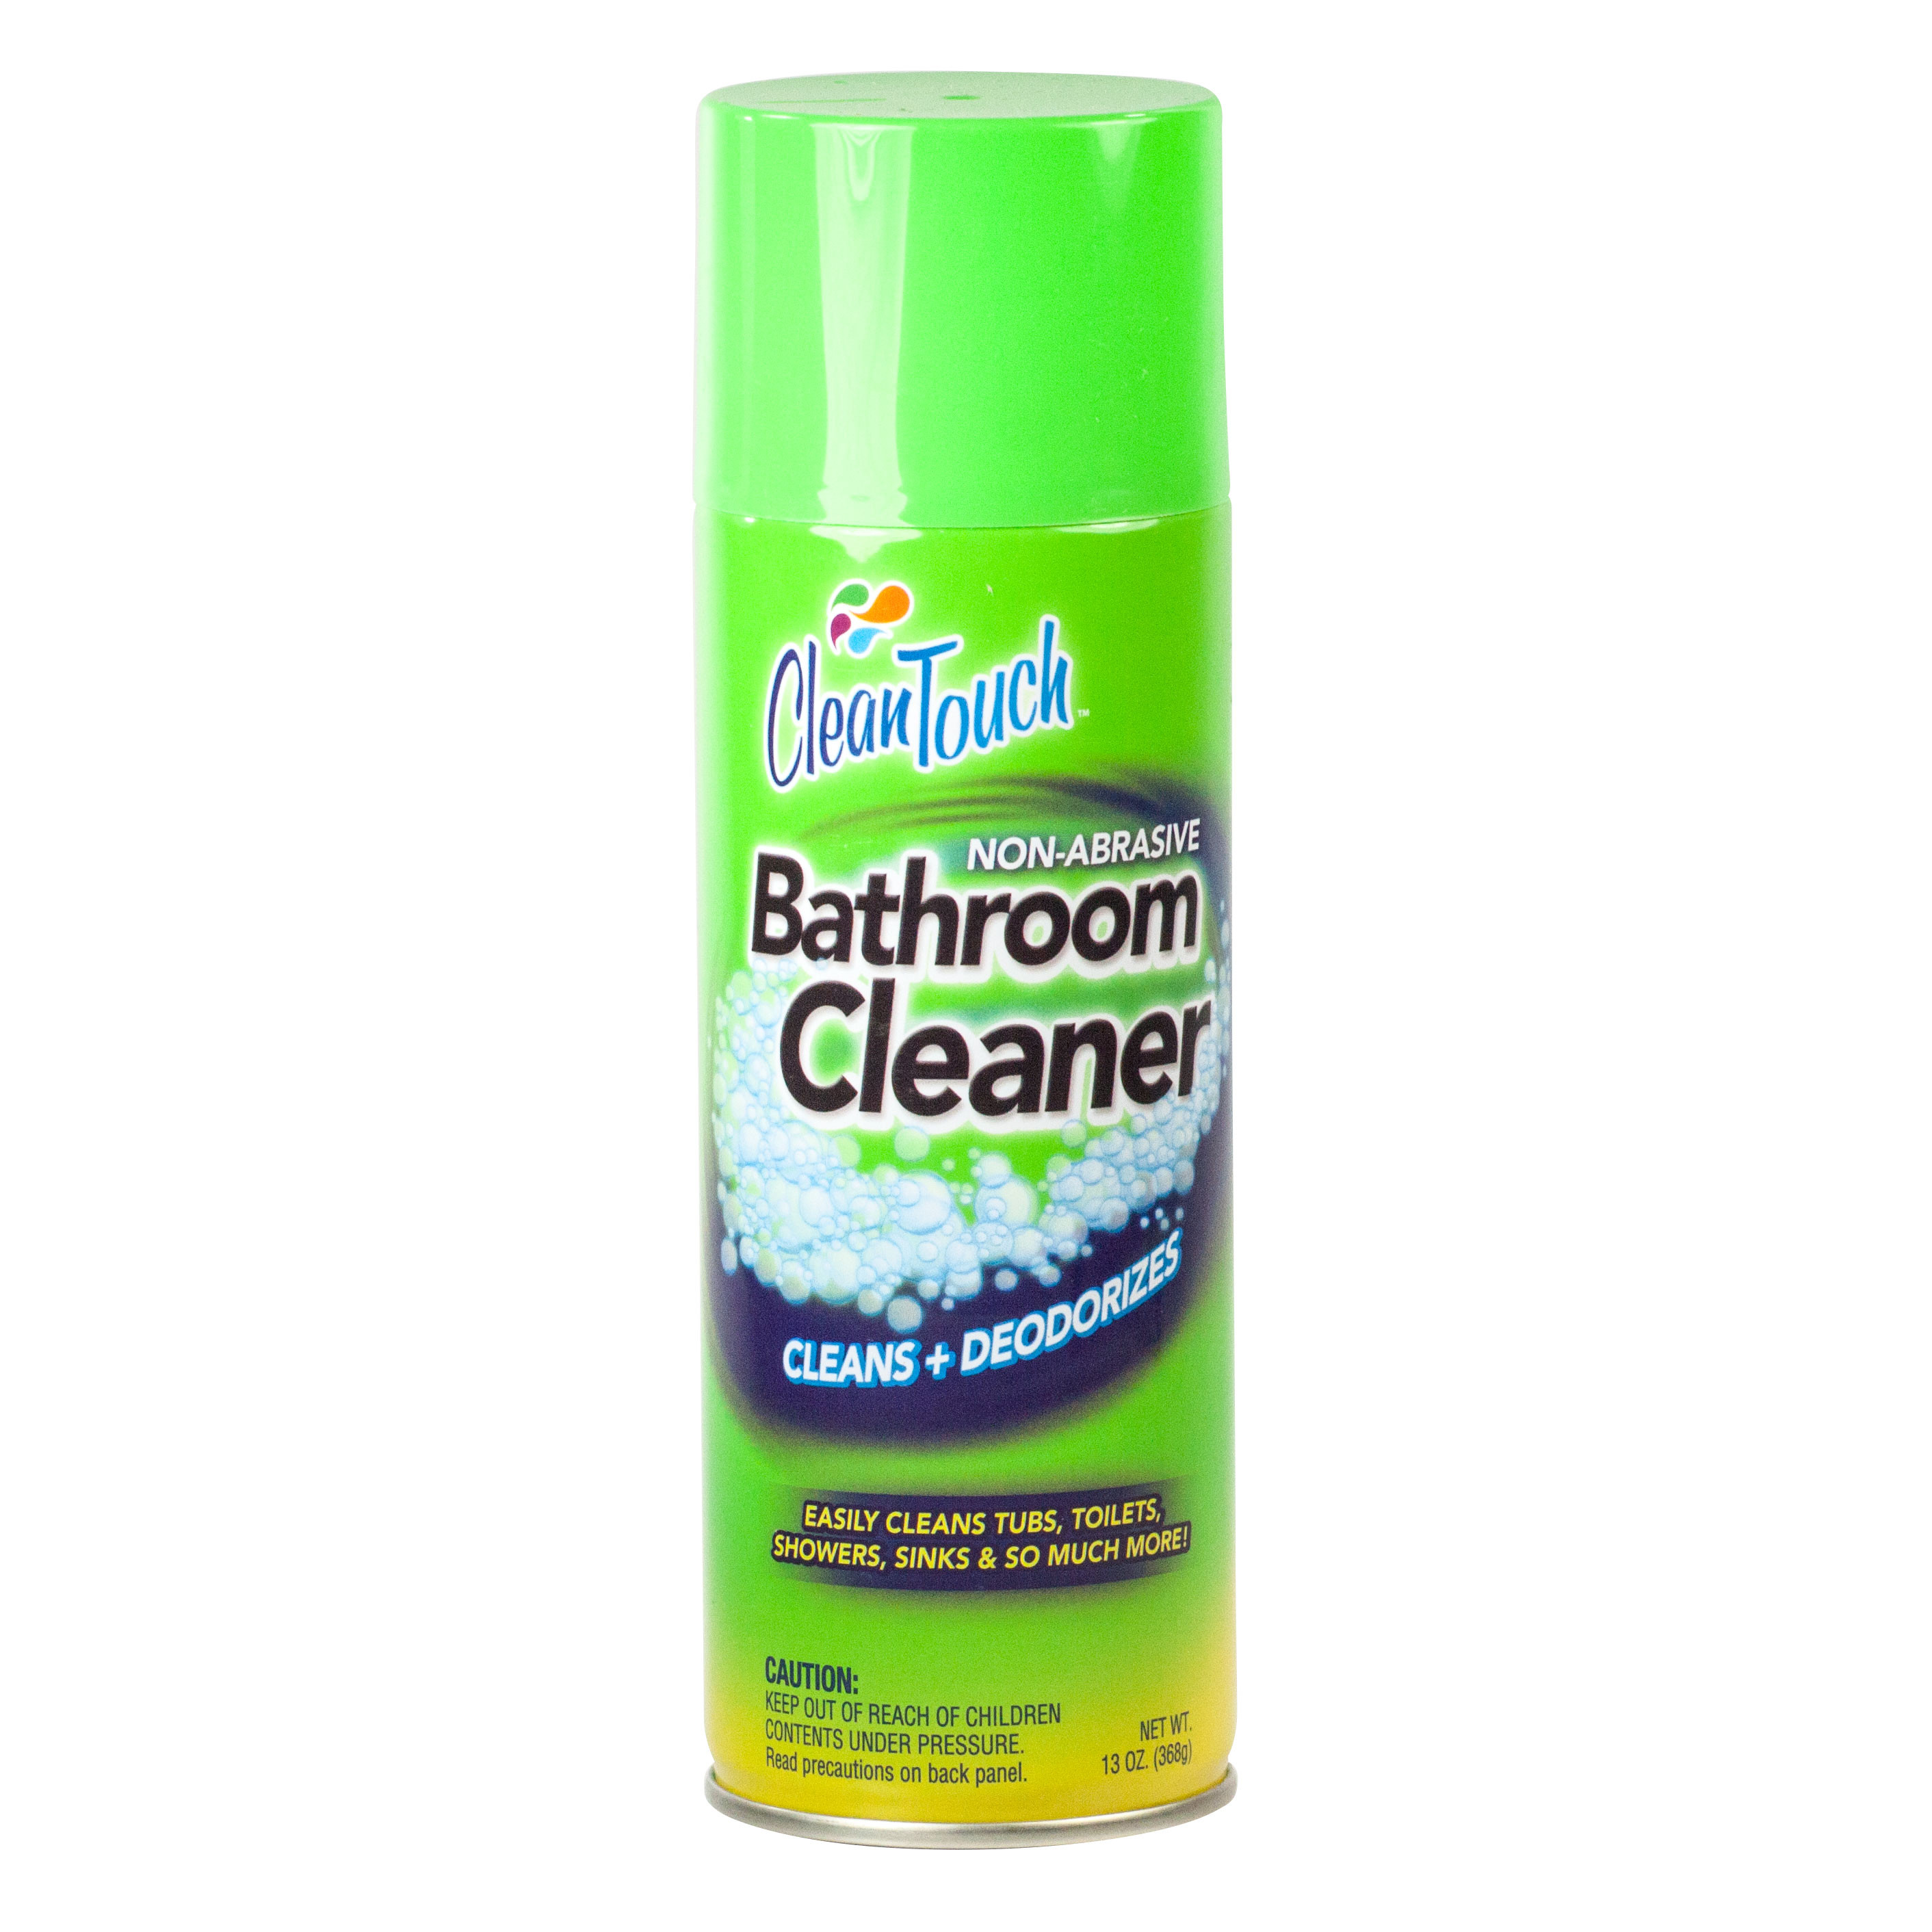 Flood 9650 13-Ounce Clean Touch Non-Abrasive Bathroom Cleaner at